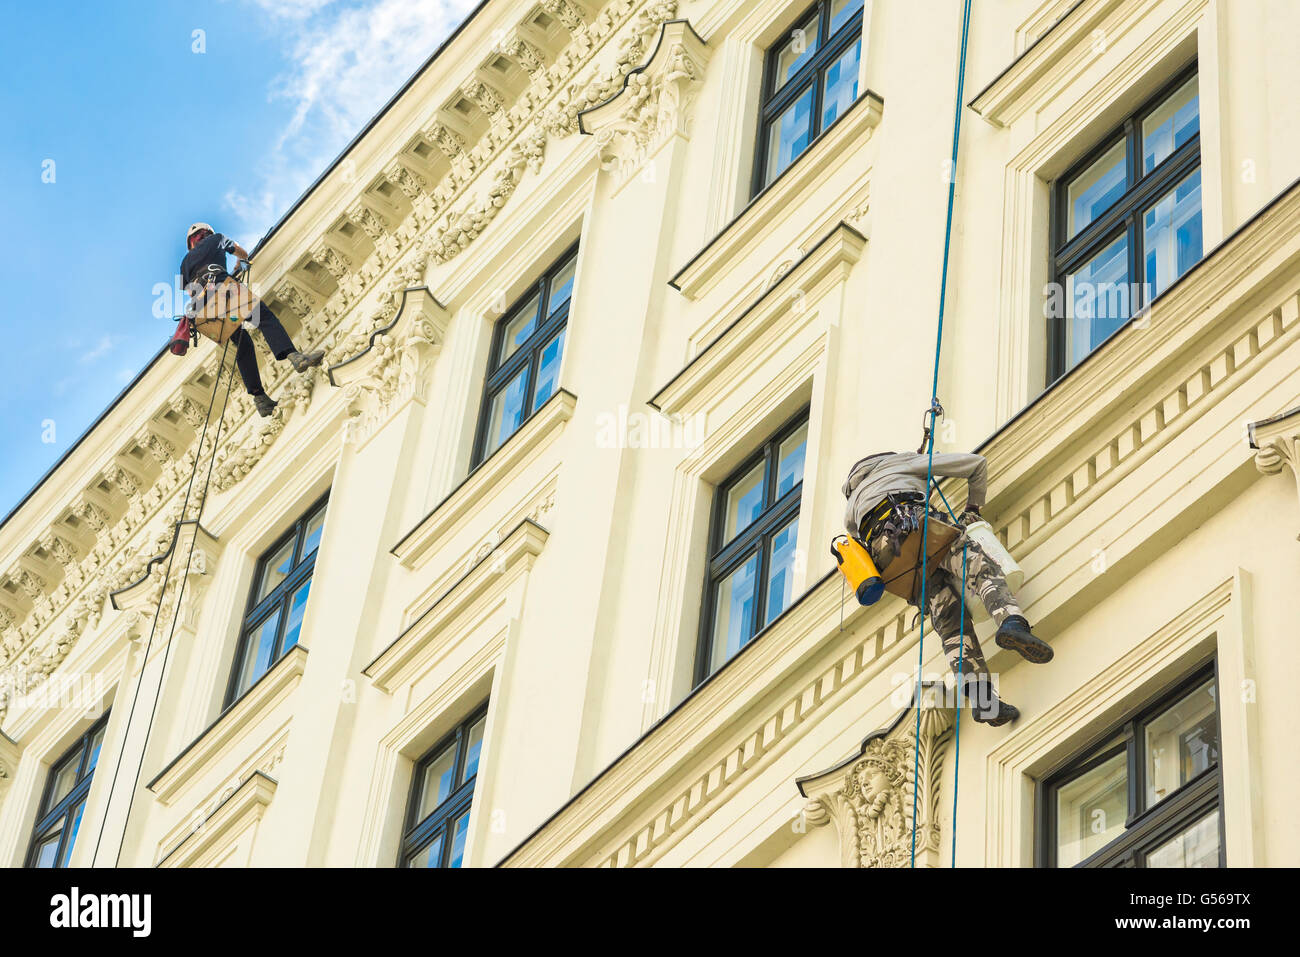 Two men suspended from ropes paint the exterior of an apartment building in the centre of Budapest, Hungary. Stock Photo